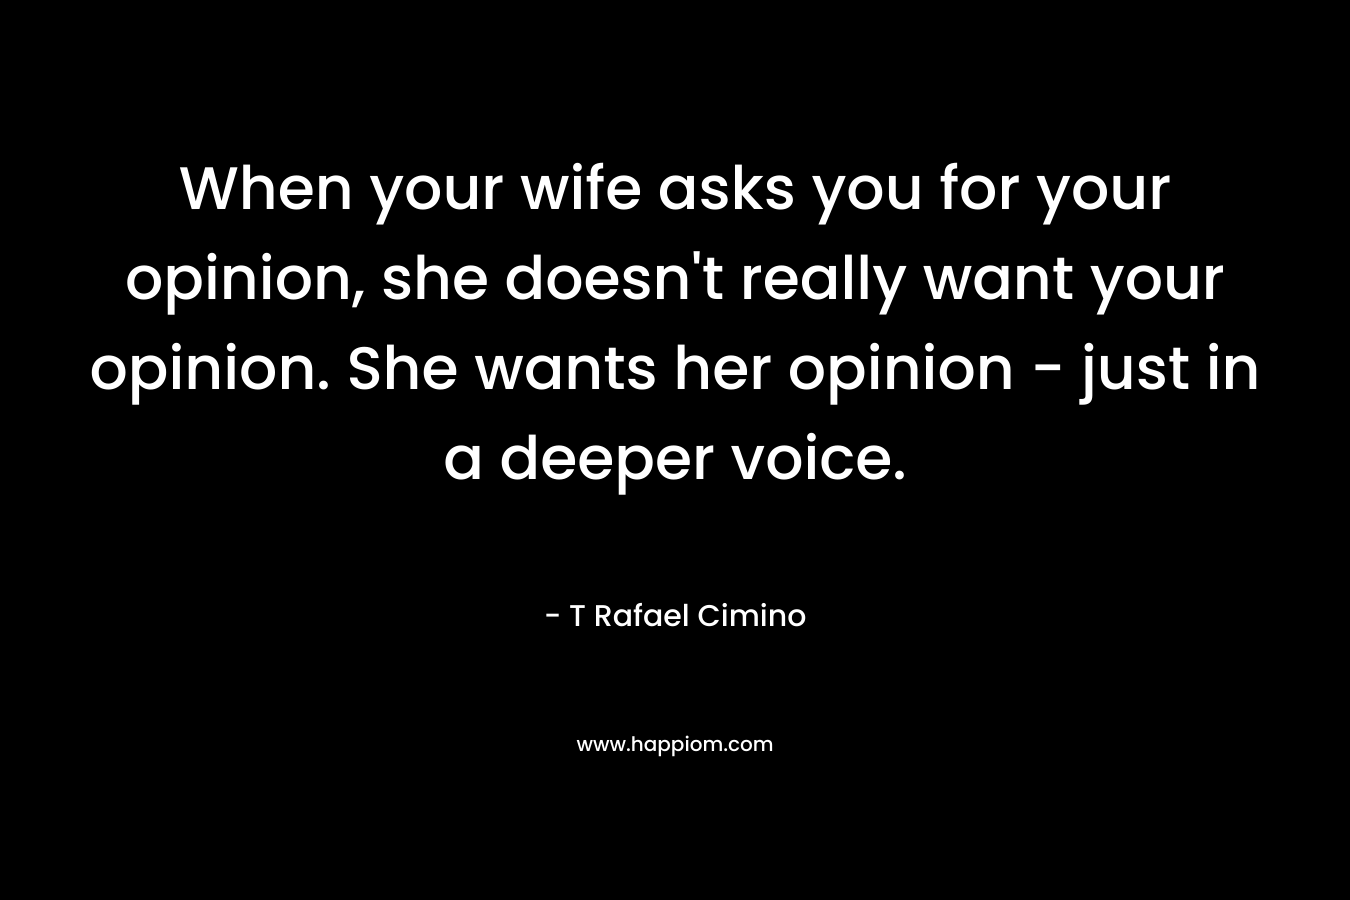 When your wife asks you for your opinion, she doesn't really want your opinion. She wants her opinion - just in a deeper voice.